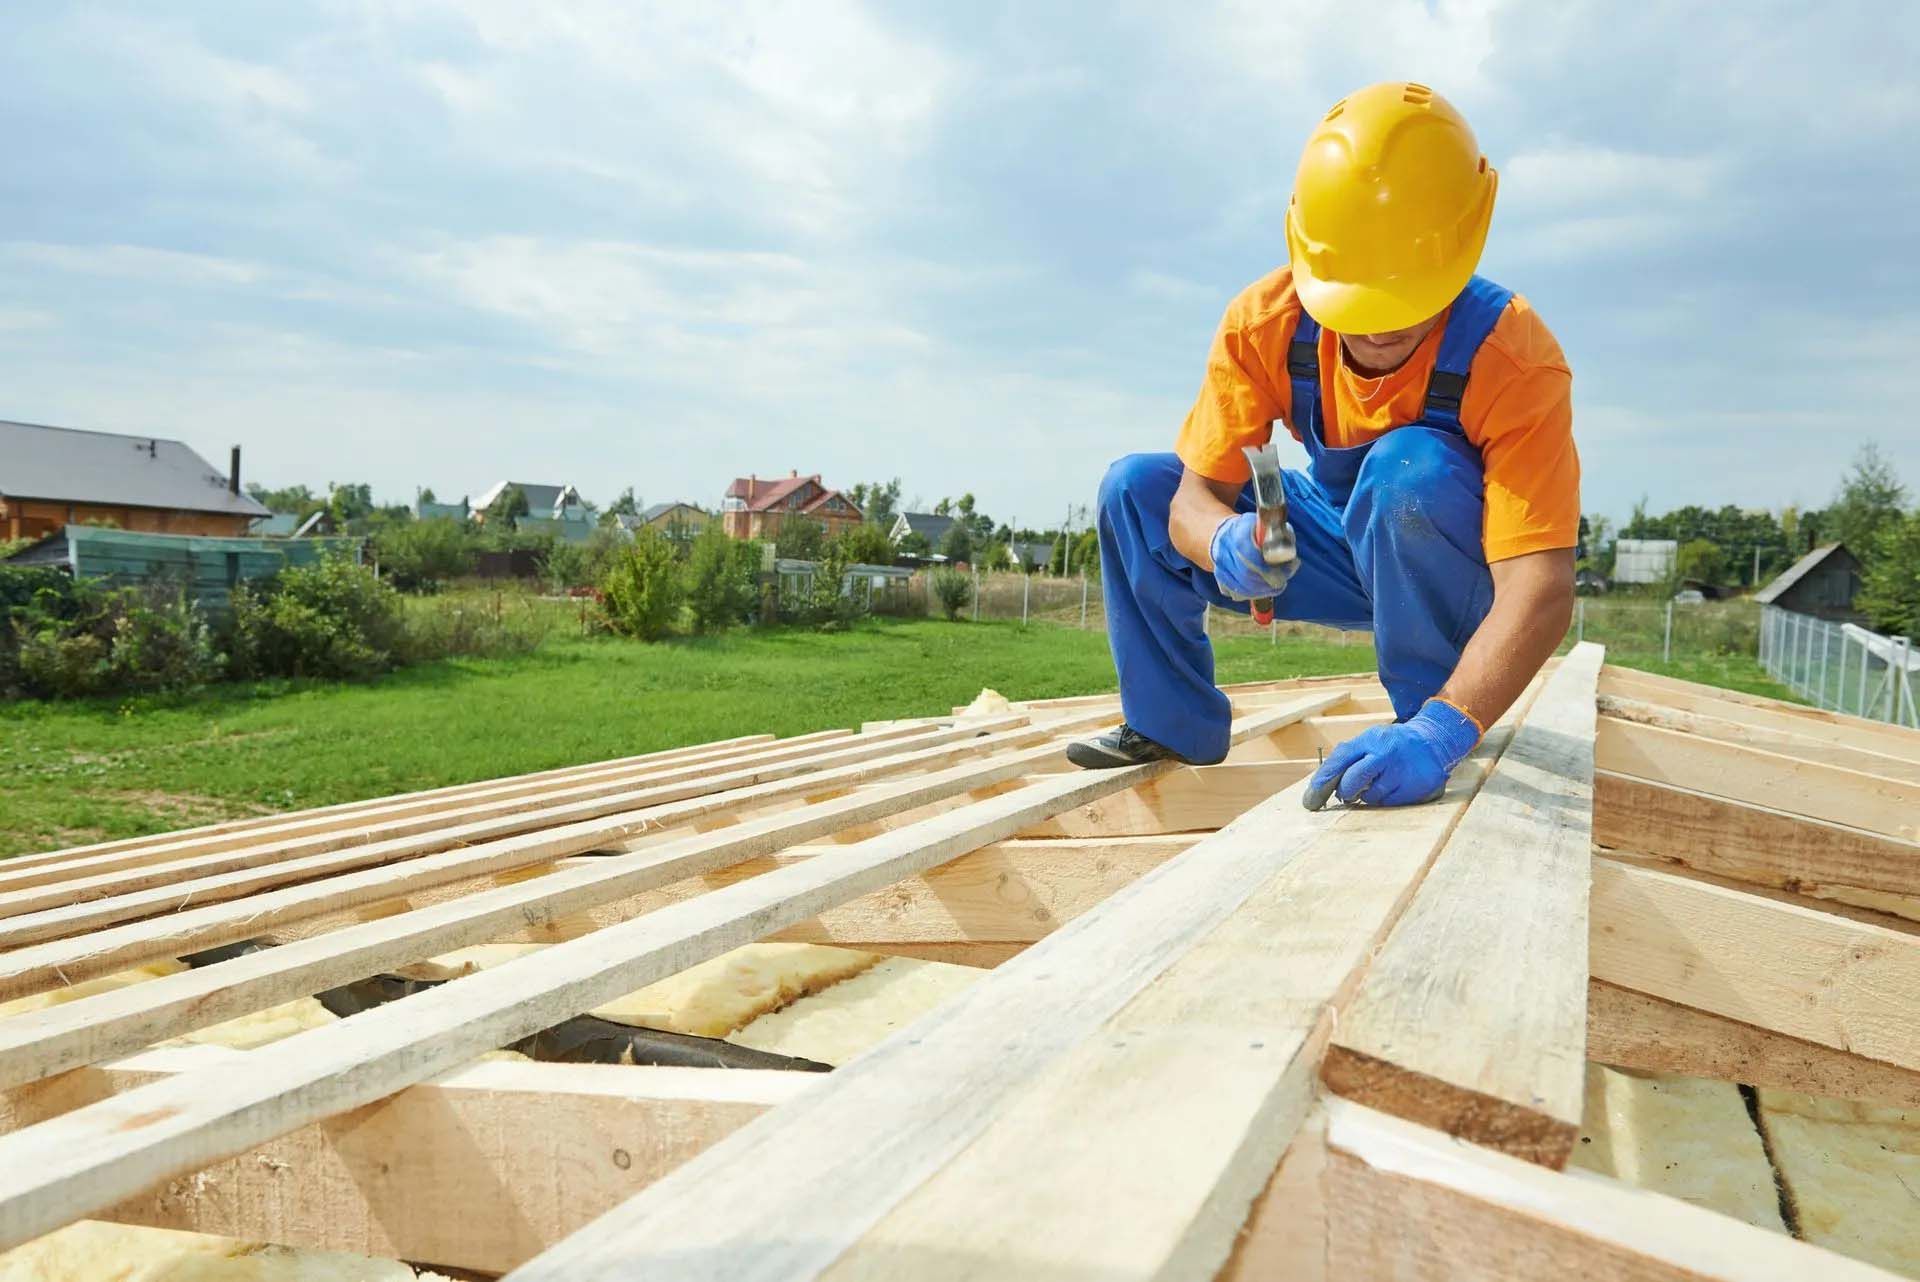 Ask These 5 Questions Before You Hire a Roofer